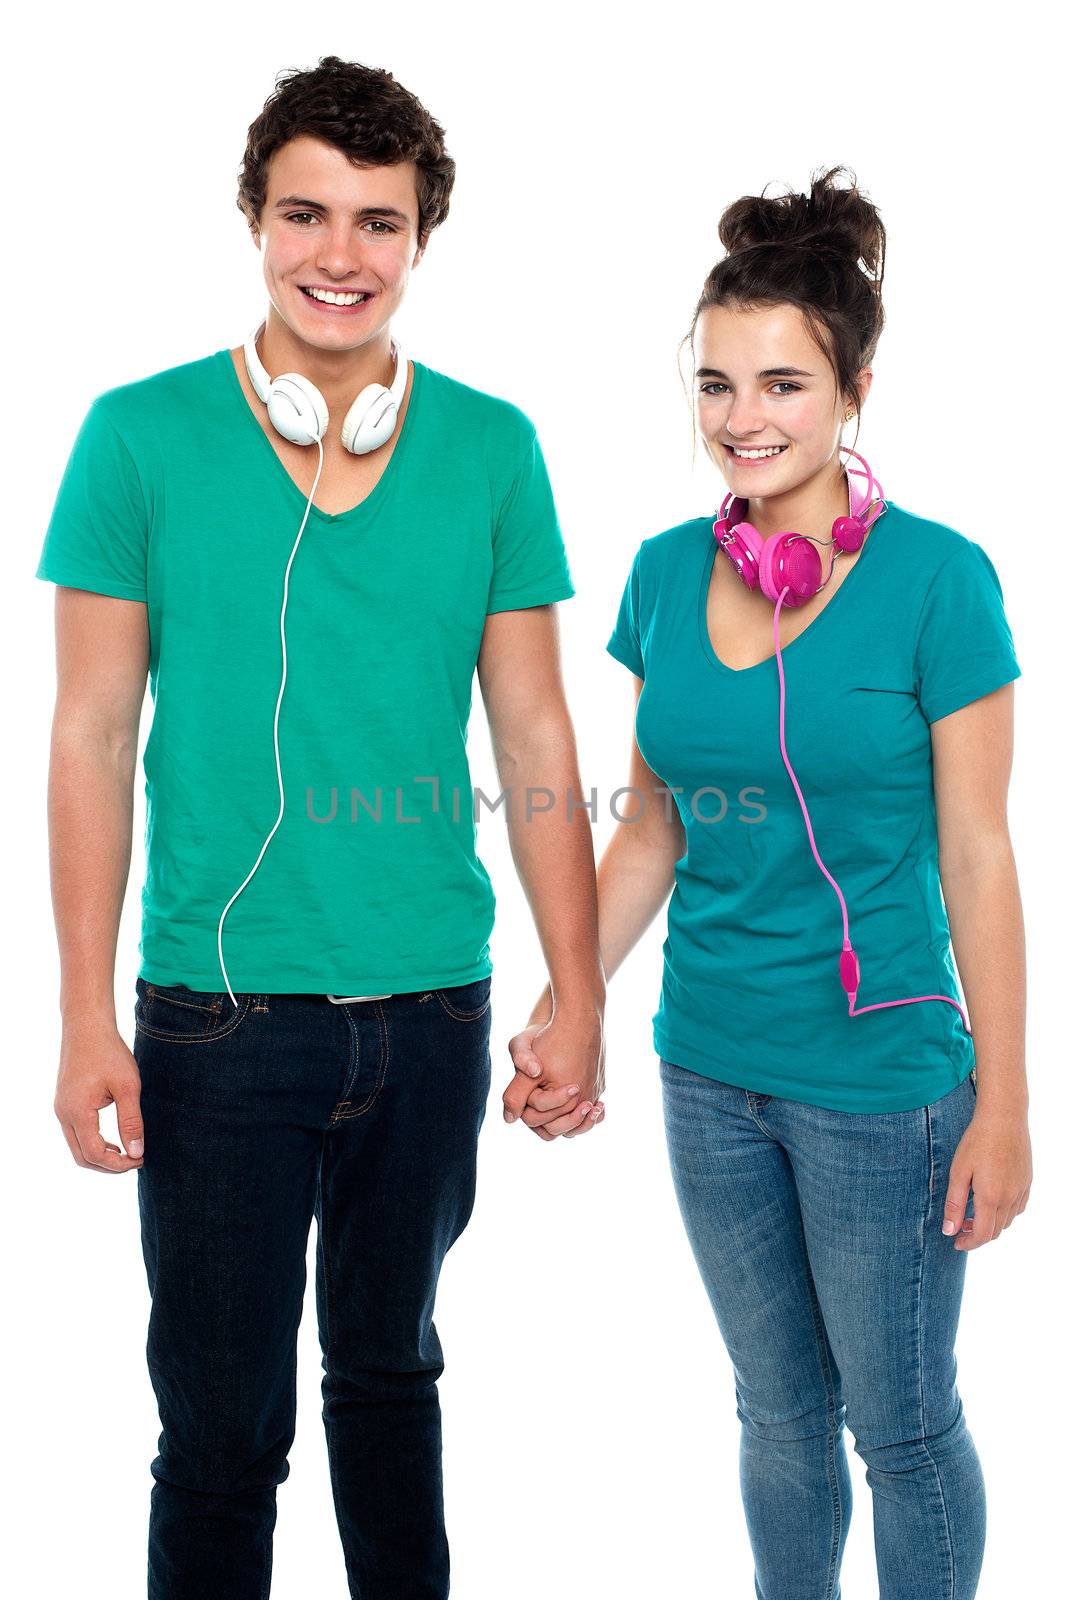 Charming happy young couple with headphones around their necks, holding hands. Great bonding